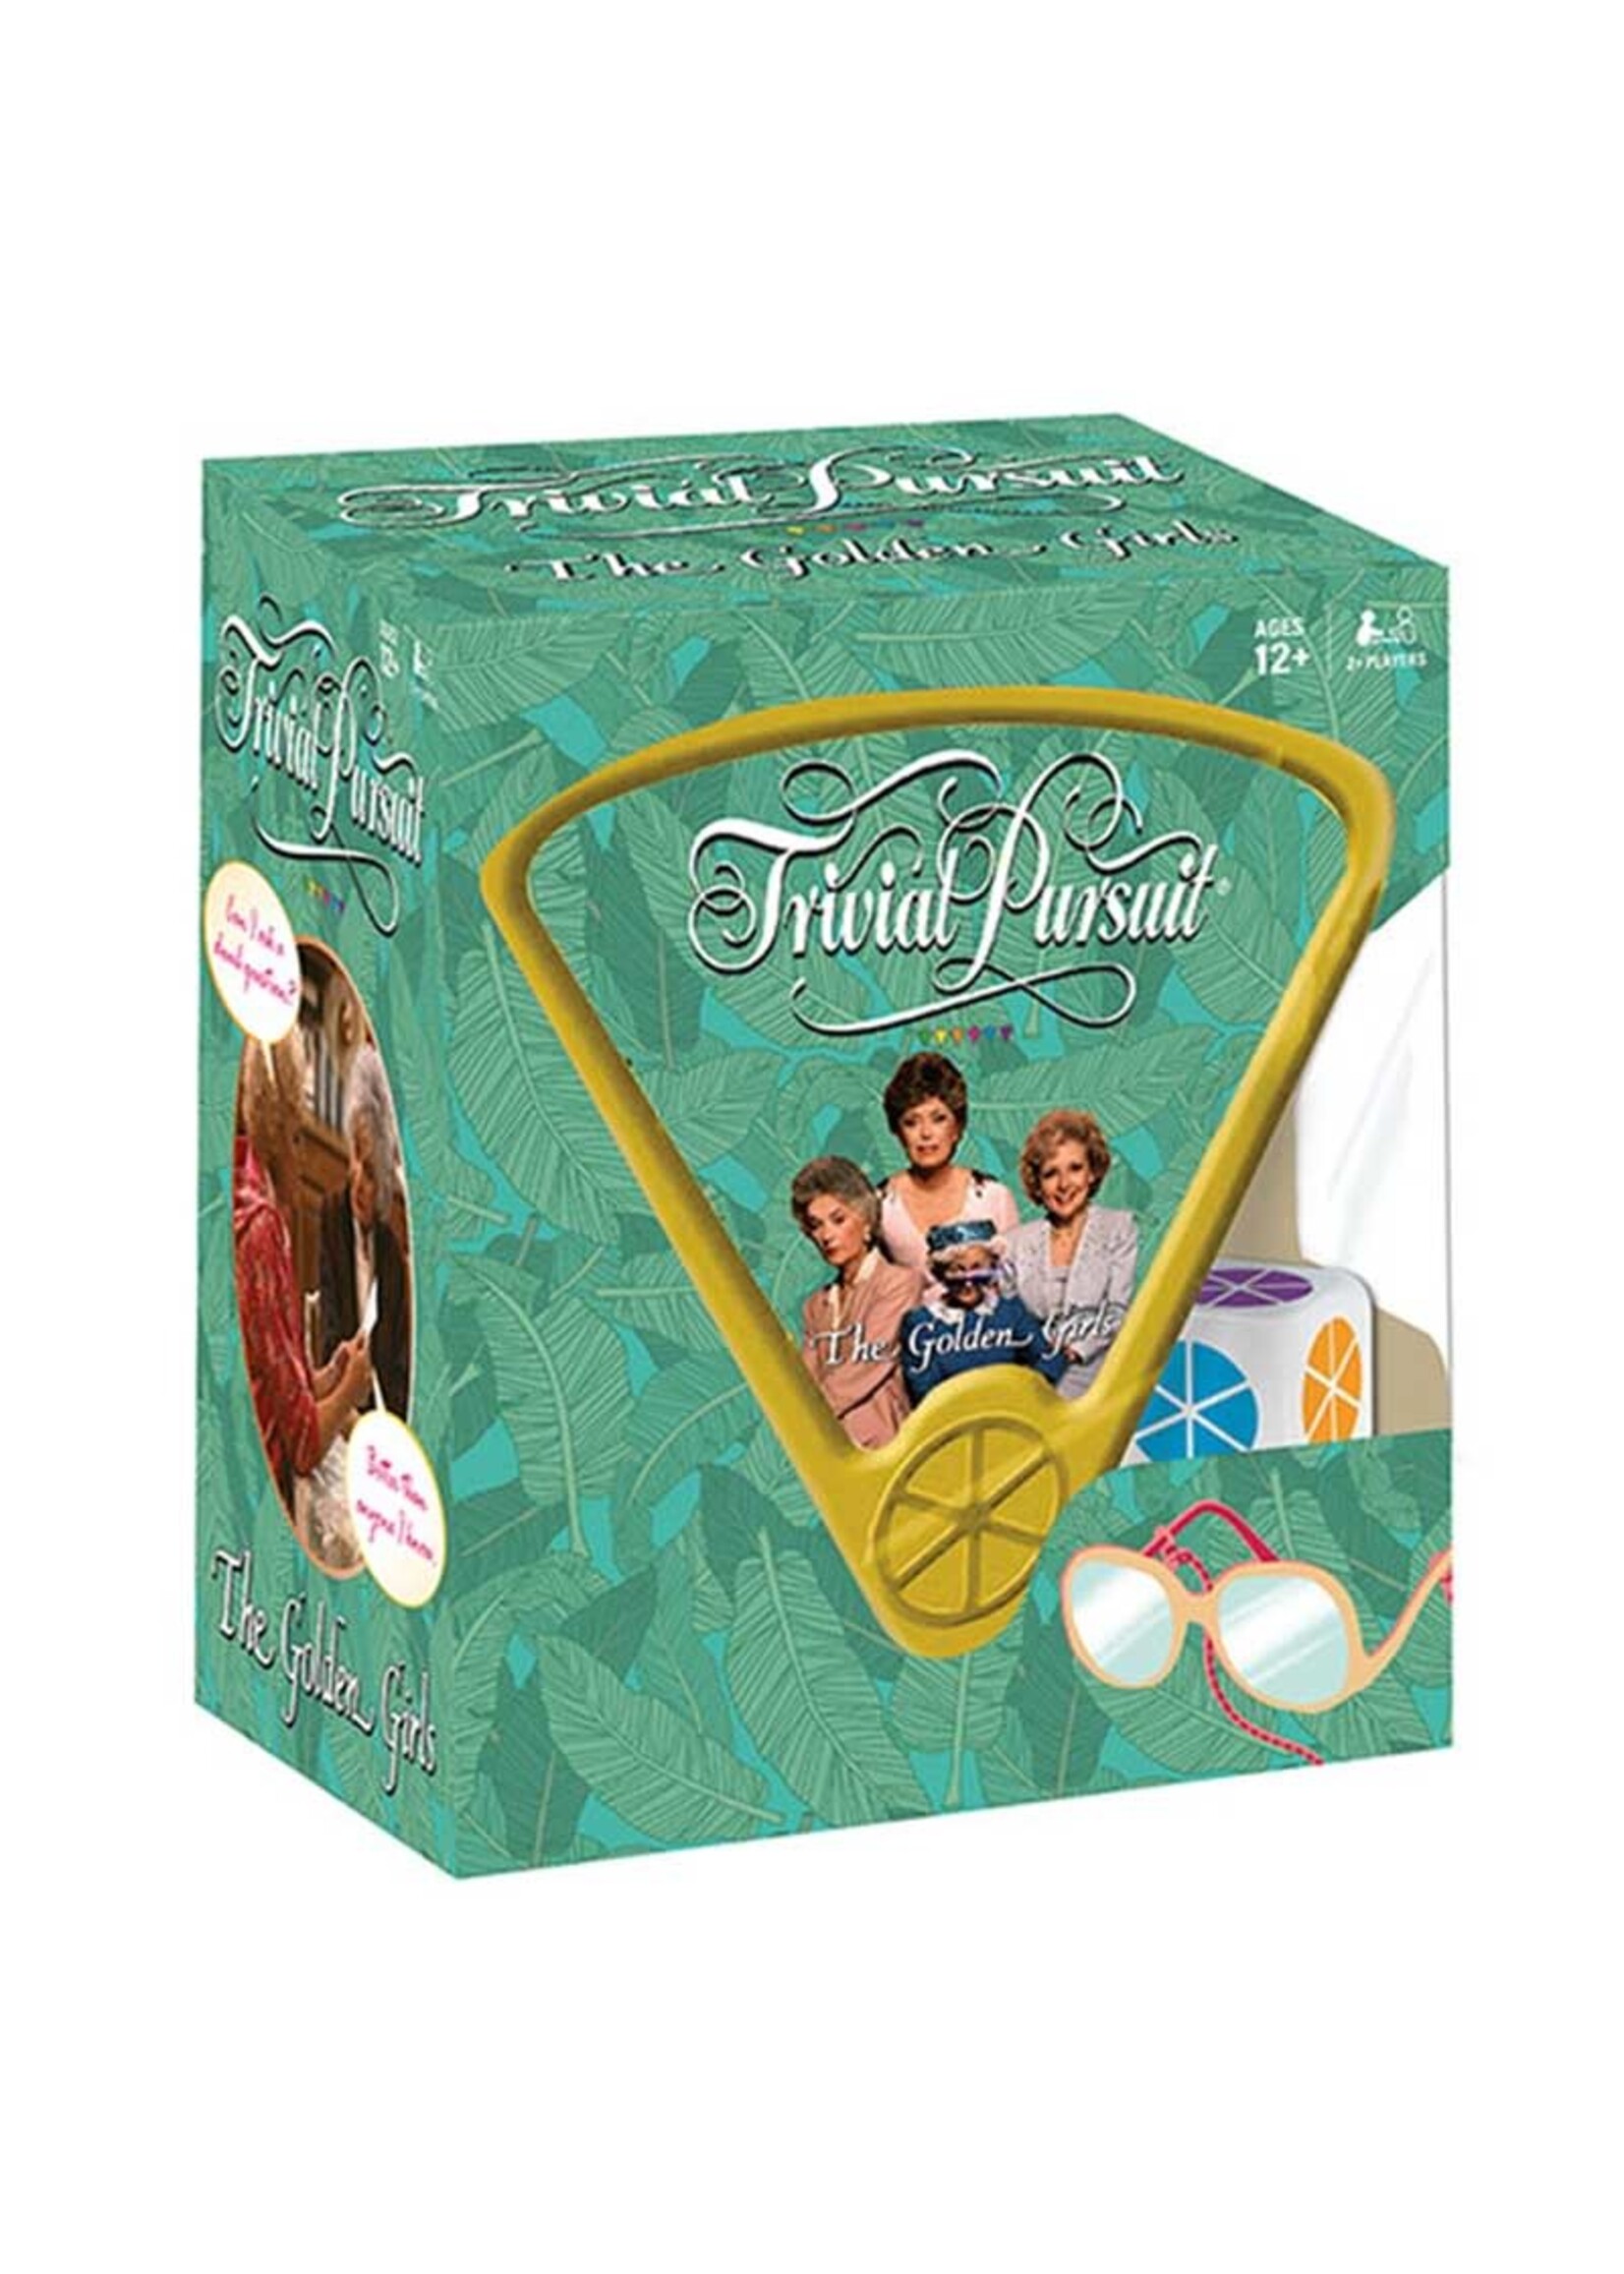 Usaopoly Trivial Pursuit: Golden Girls